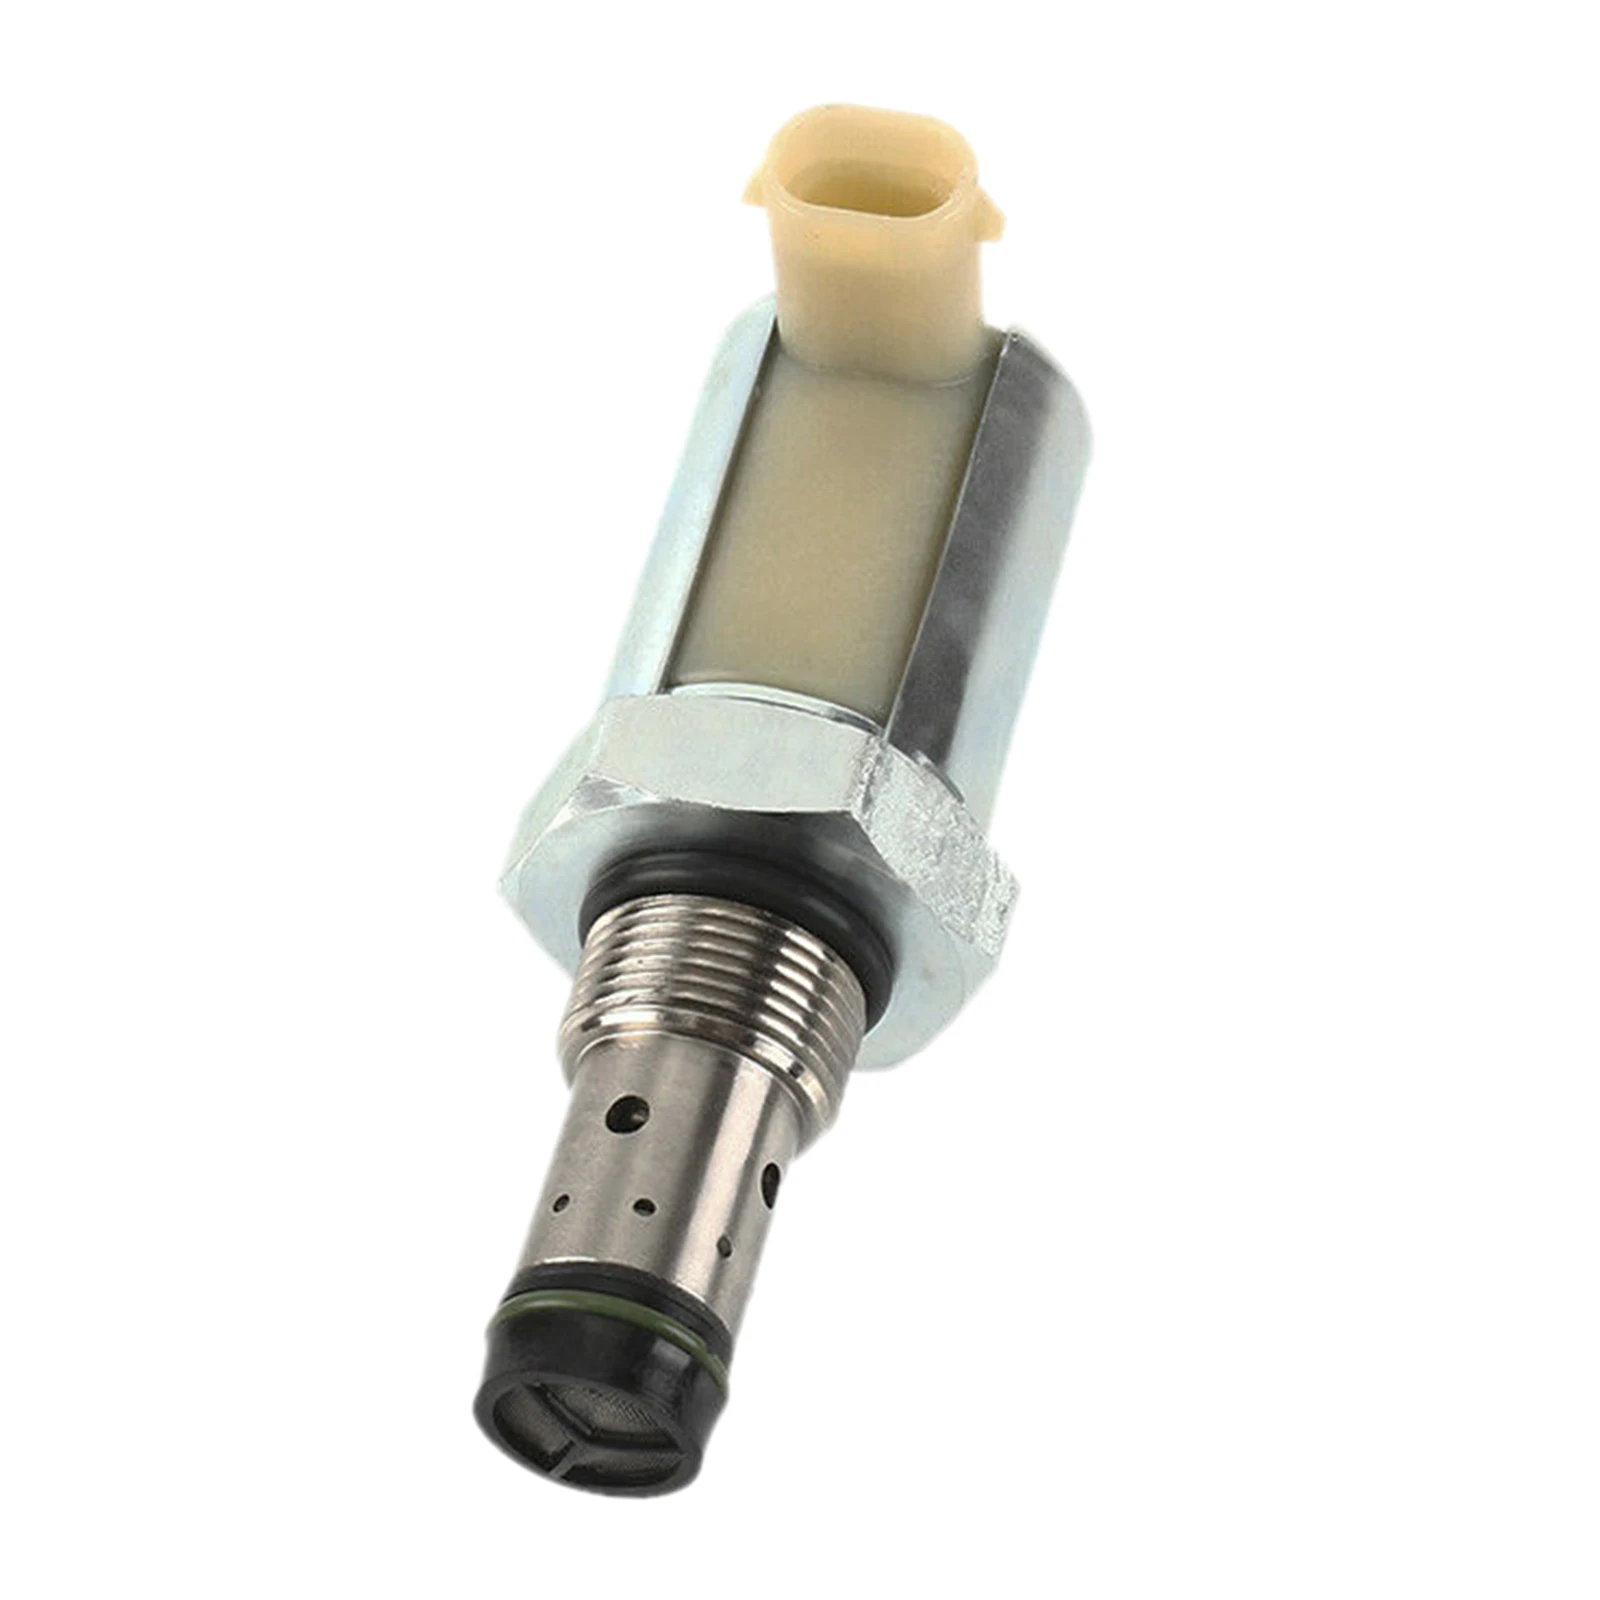 IPR Injector Pressure Regulator Valve Fit for Ford E-350 Replacement 5C3Z-9C968-CA 3C3Z-9C968-AA CM-5126 Parts